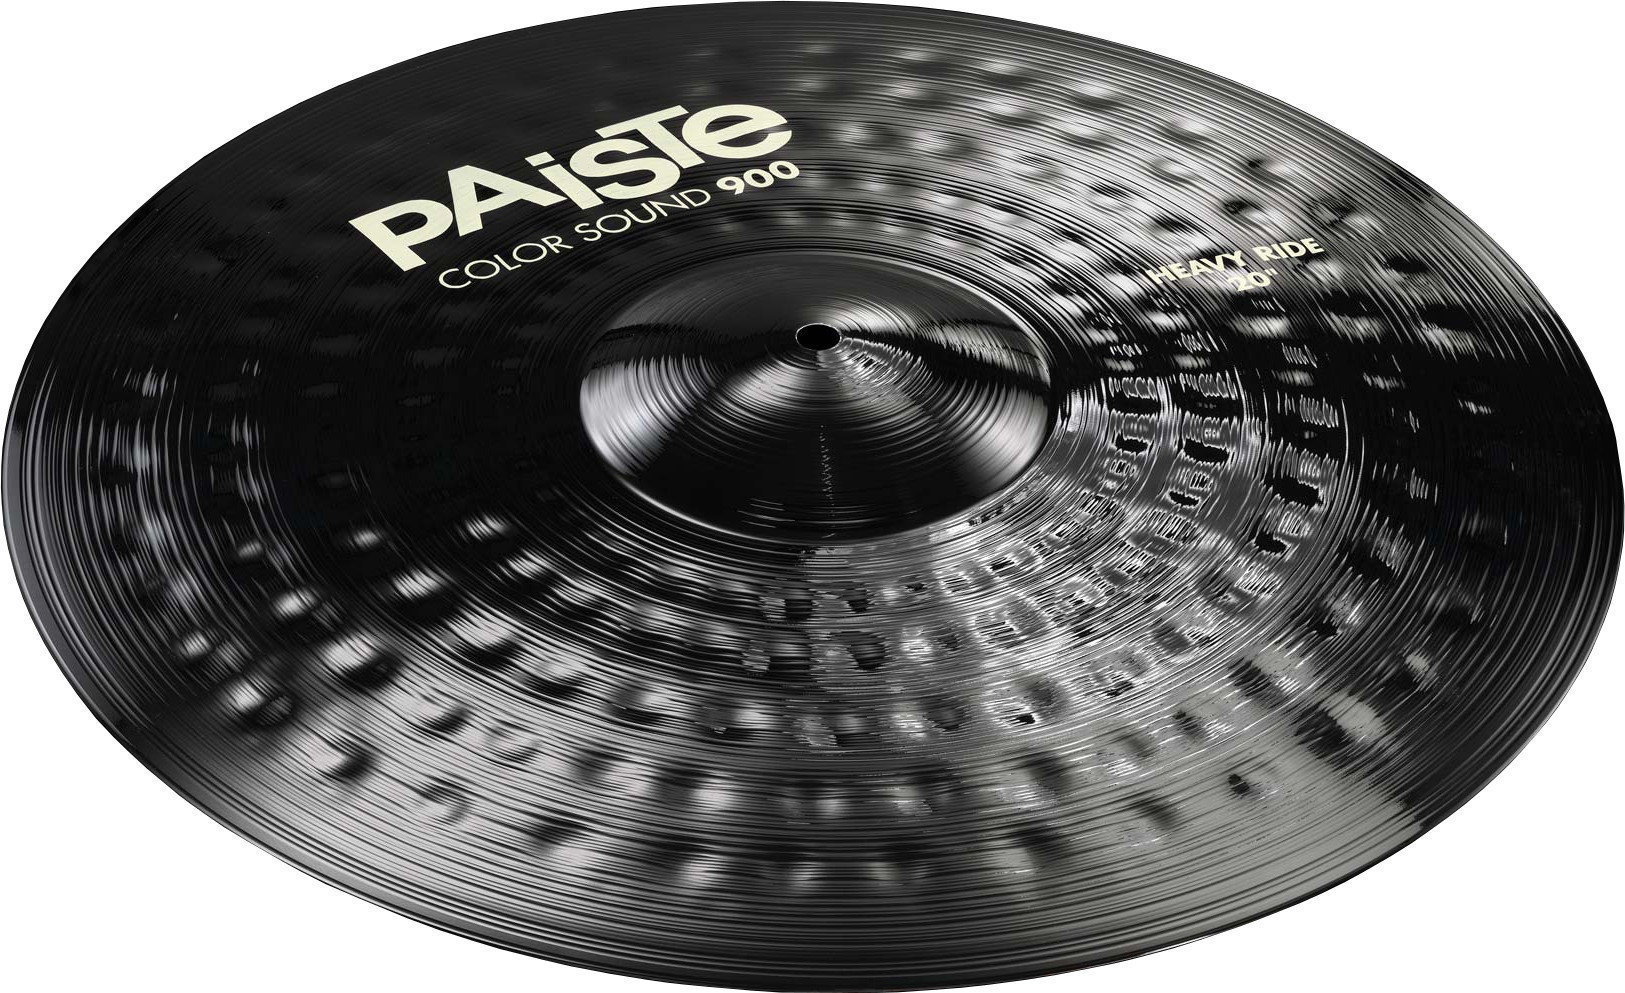 Ride Cymbal Paiste Color Sound 900  Heavy Ride Cymbal 20" Black